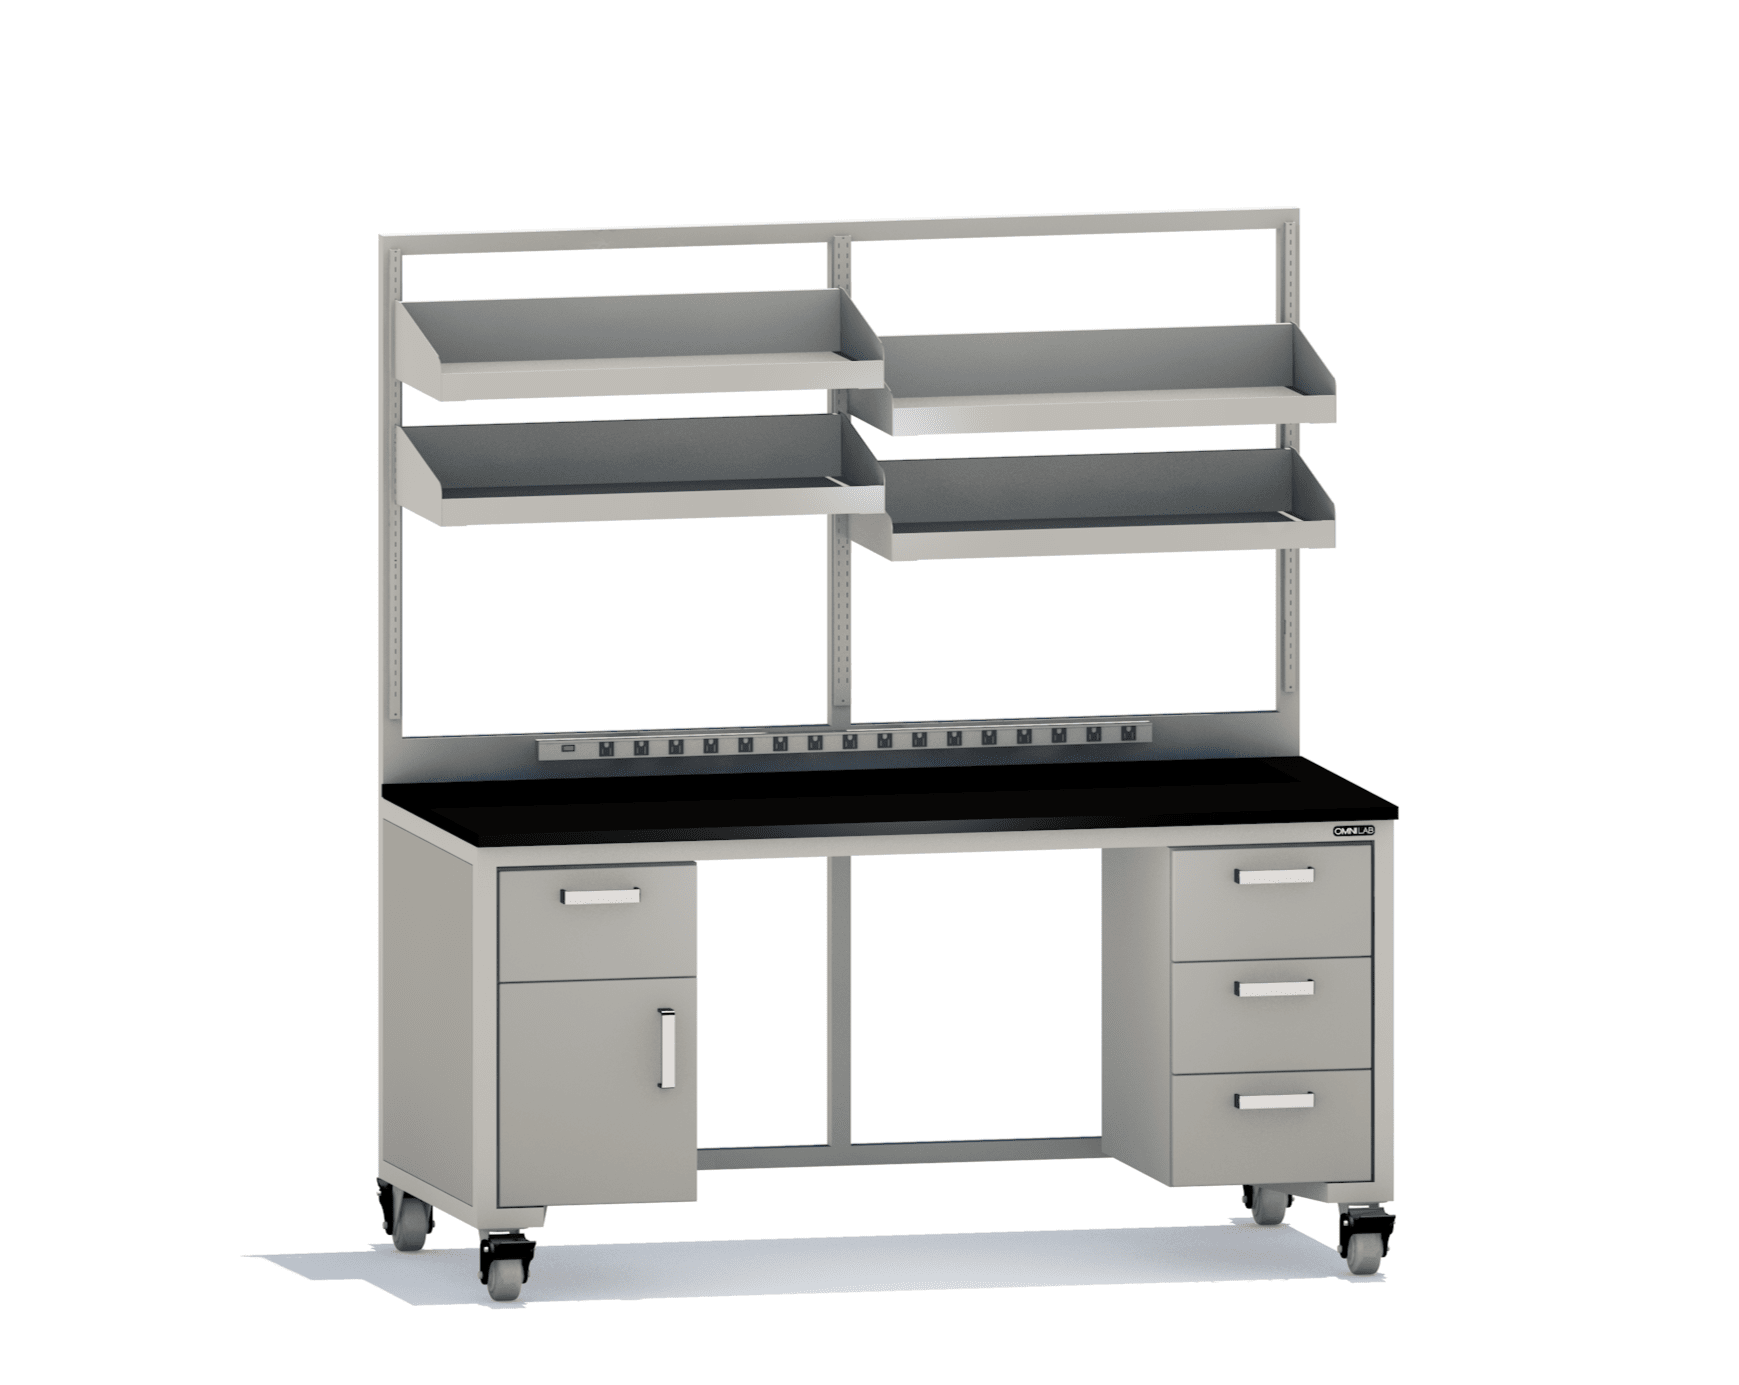 Core Workstation - series four Workstations OMNI Lab Solutions 72" wide 